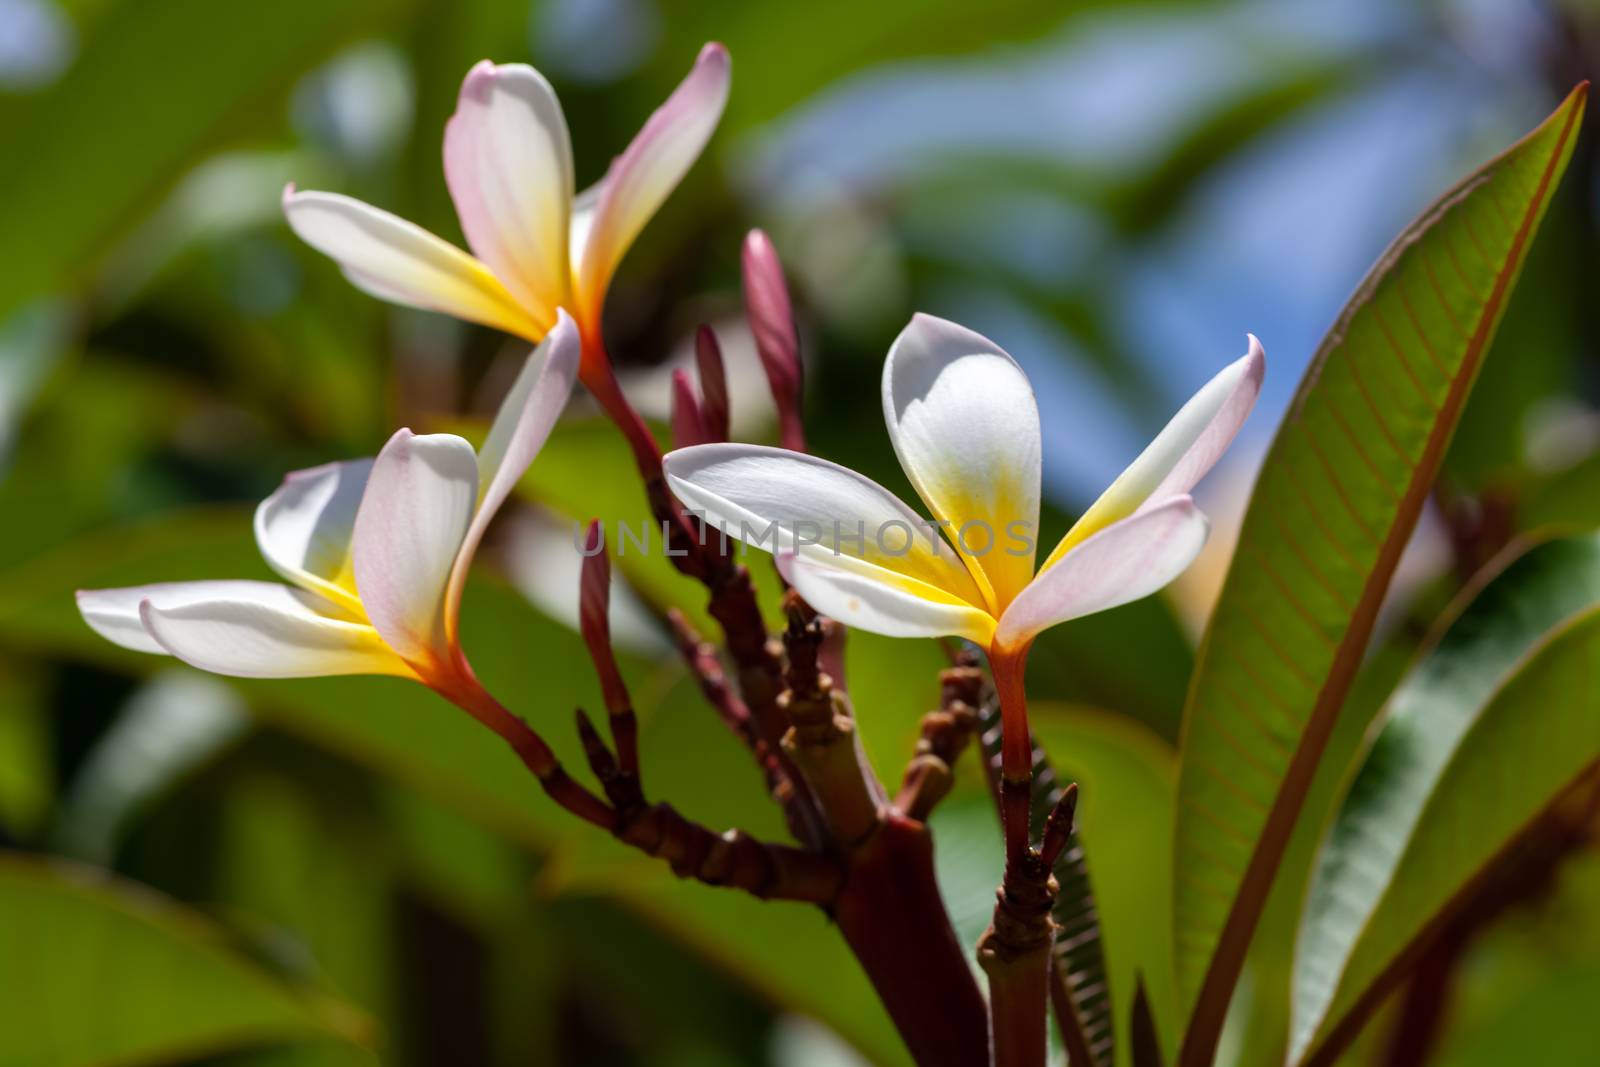 An image of a white and yellow frangipani flower